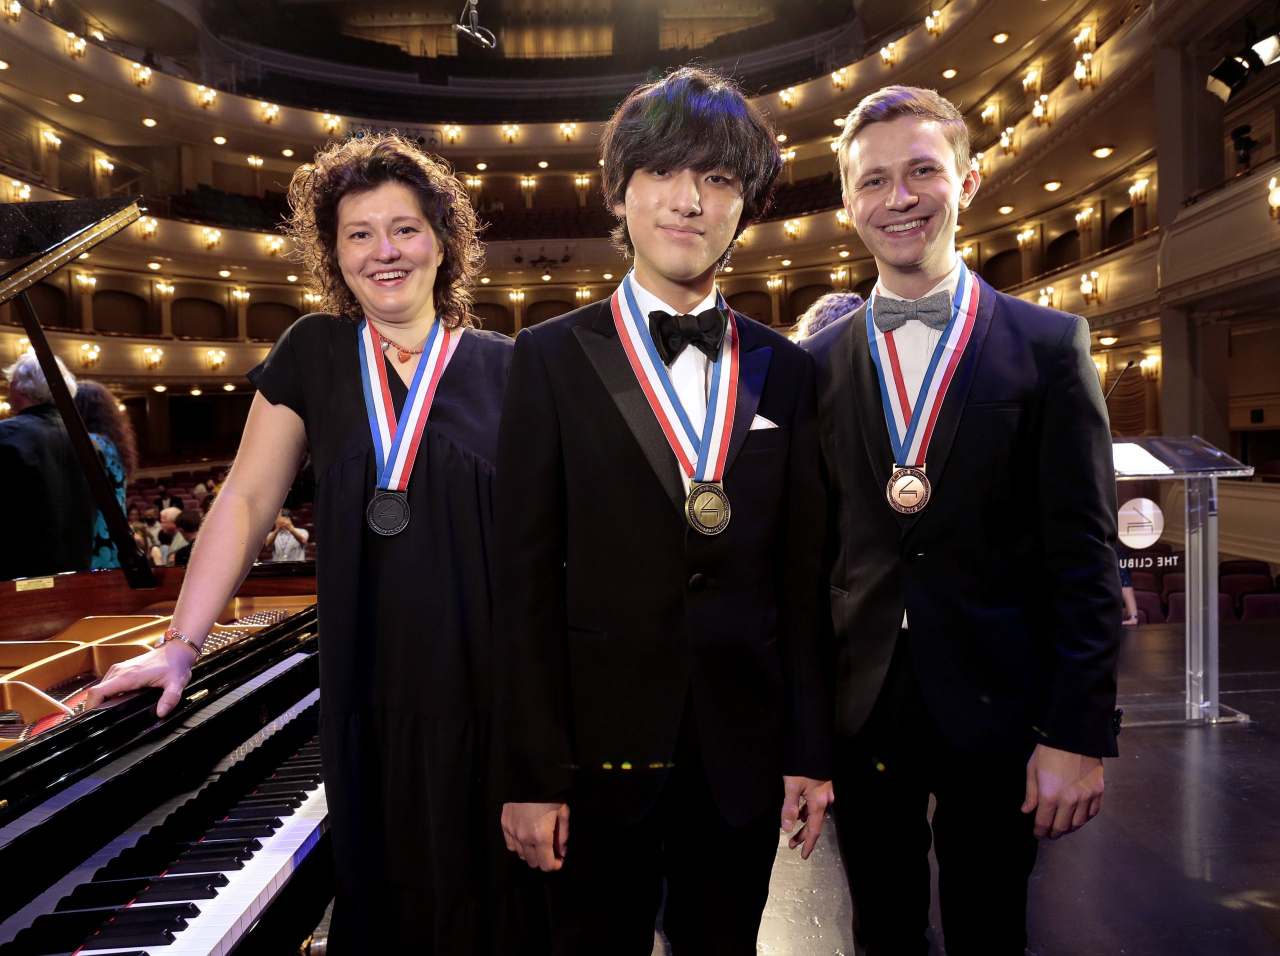 Lim Yun-chan (center), gold medalist at the 17th Van Cliburn International Piano Competition, poses with silver medalist Anna Geniushene (left) from Russia and bronze medalist Dmytro Choni from Ukraine. (Van Cliburn International Piano Competition)